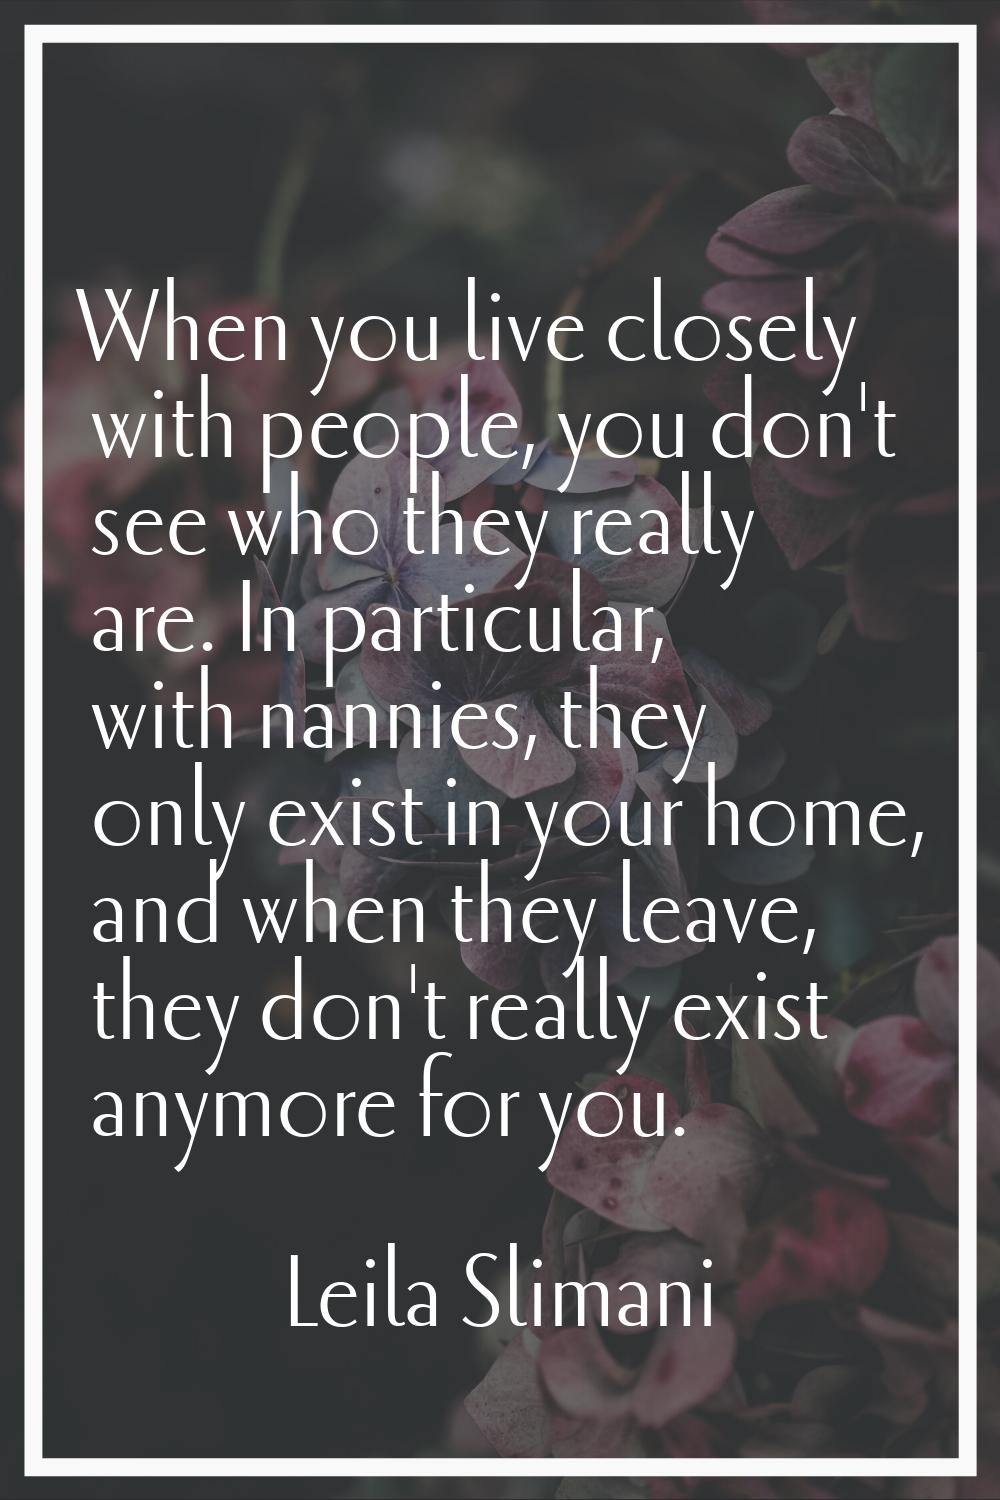 When you live closely with people, you don't see who they really are. In particular, with nannies, 